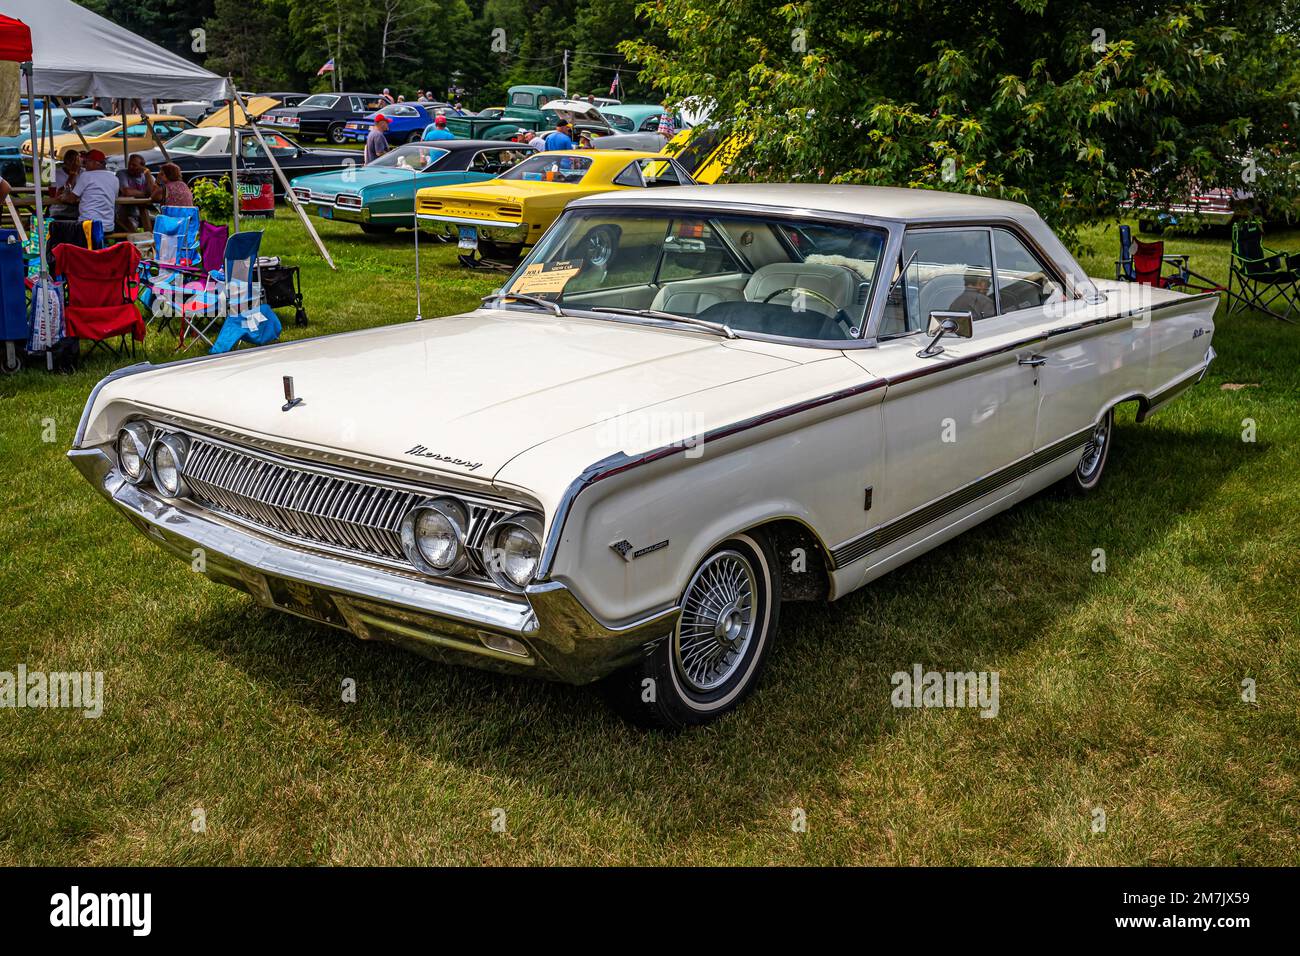 Iola, WI - July 07, 2022: High perspective front corner view of a 1964 Mercury Park Lane Marauder 2 Door Hardtop at a local car show. Stock Photo